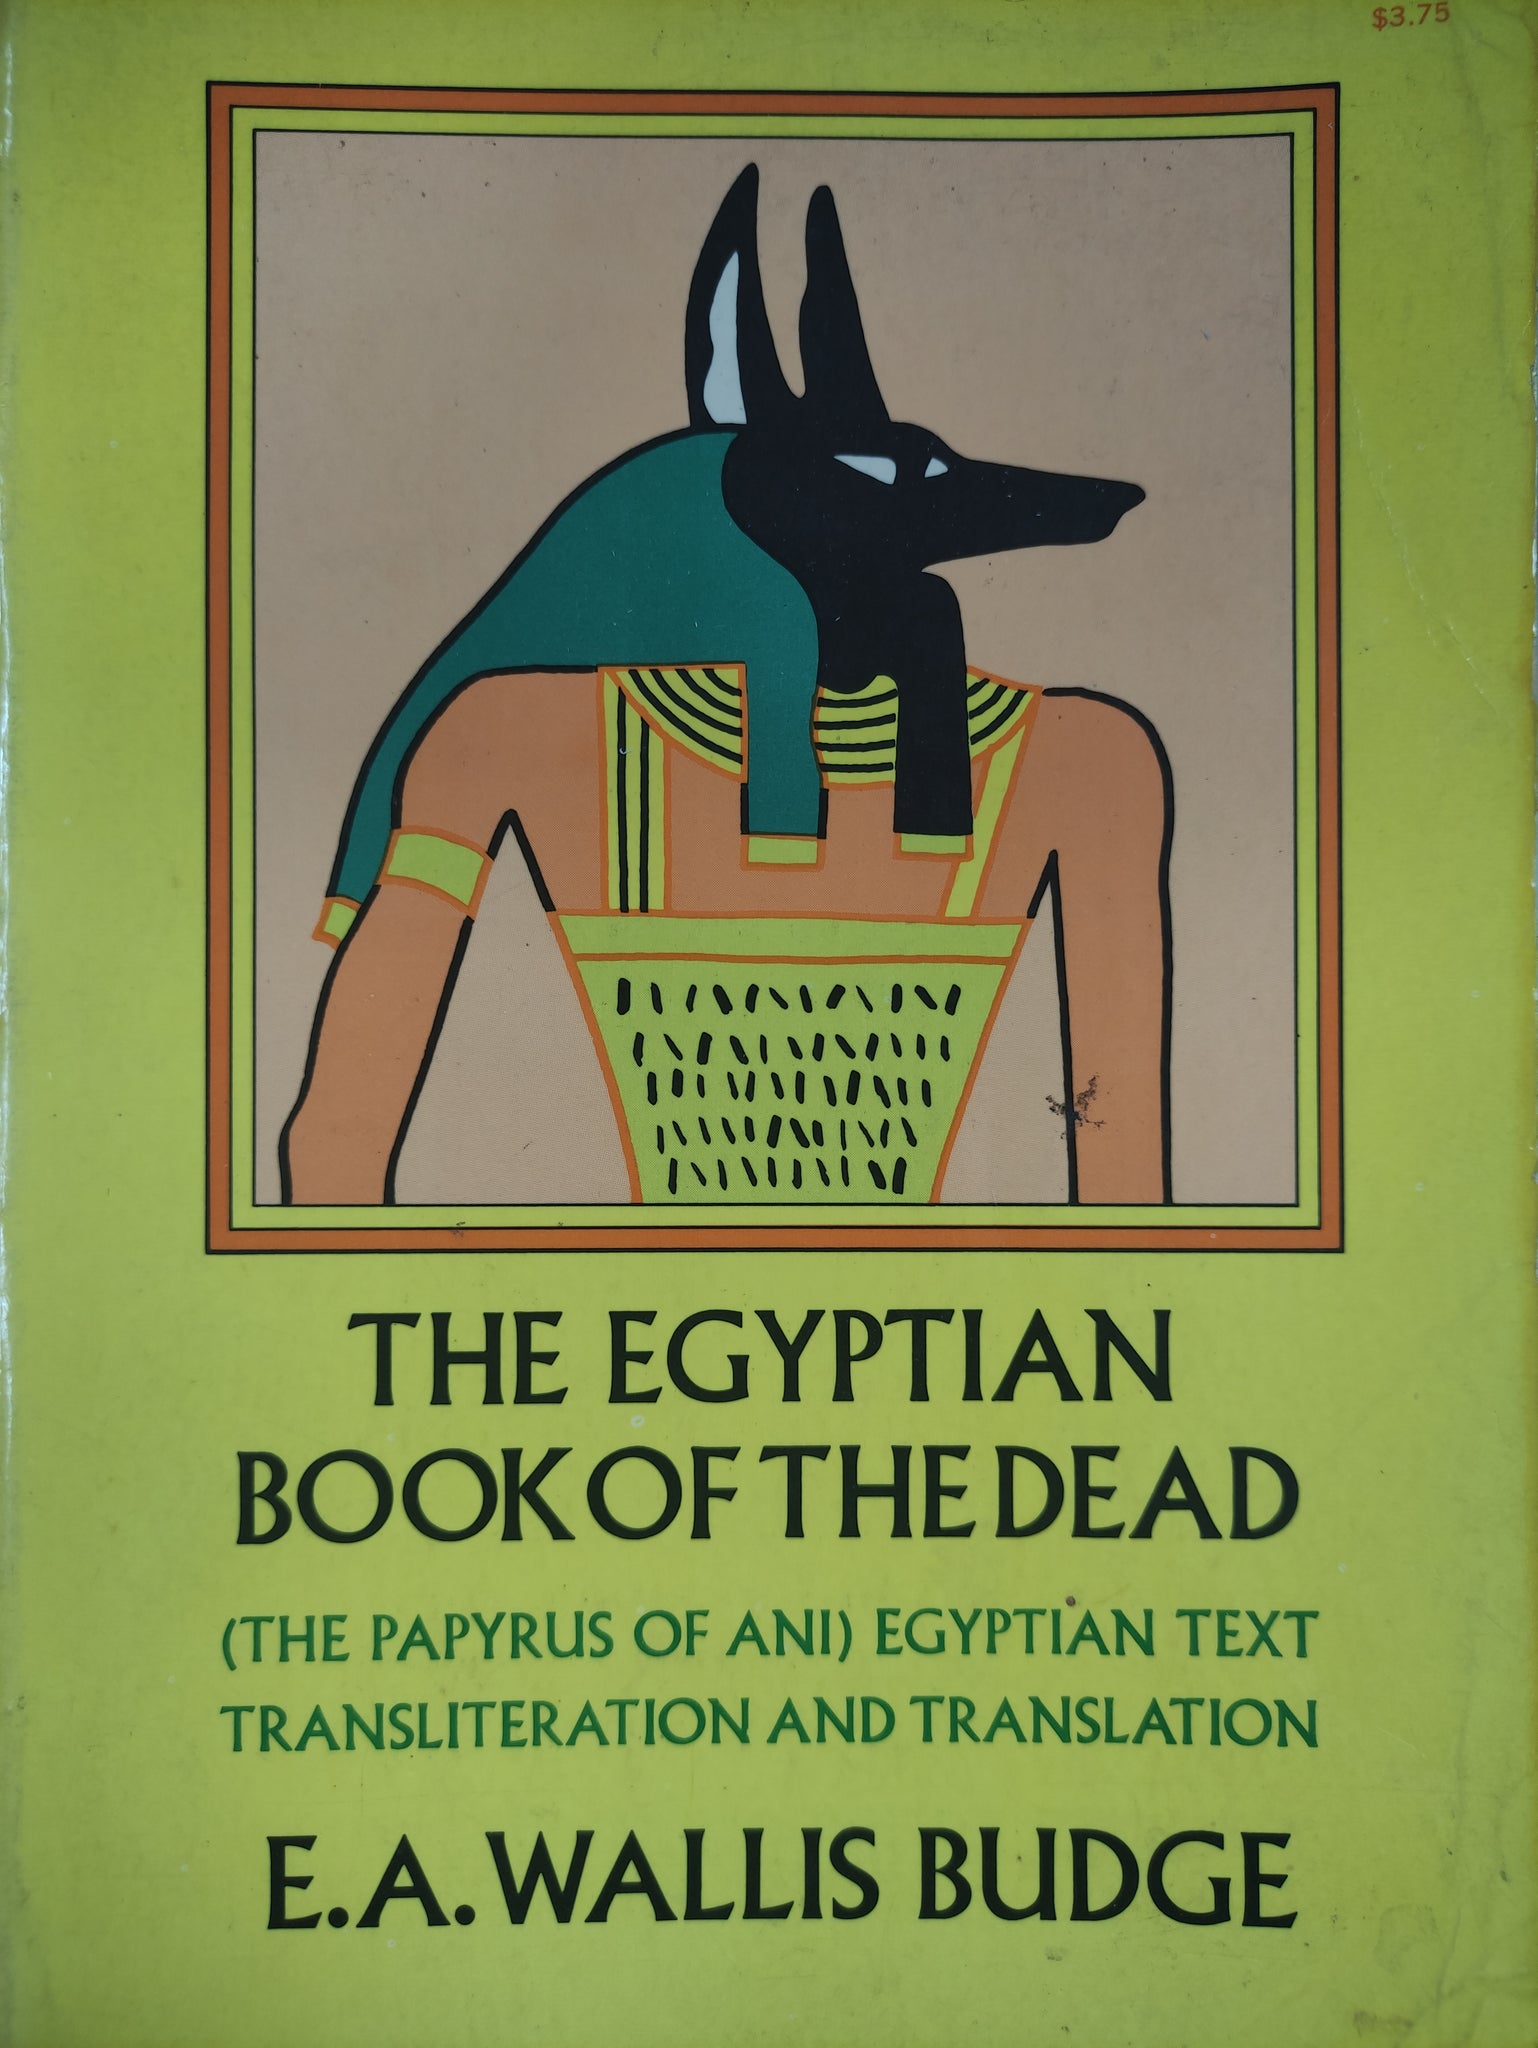 The Egyptian Book of the Dead. (The Papyrus of Ani). Egyptian text Transliteration and Translation.